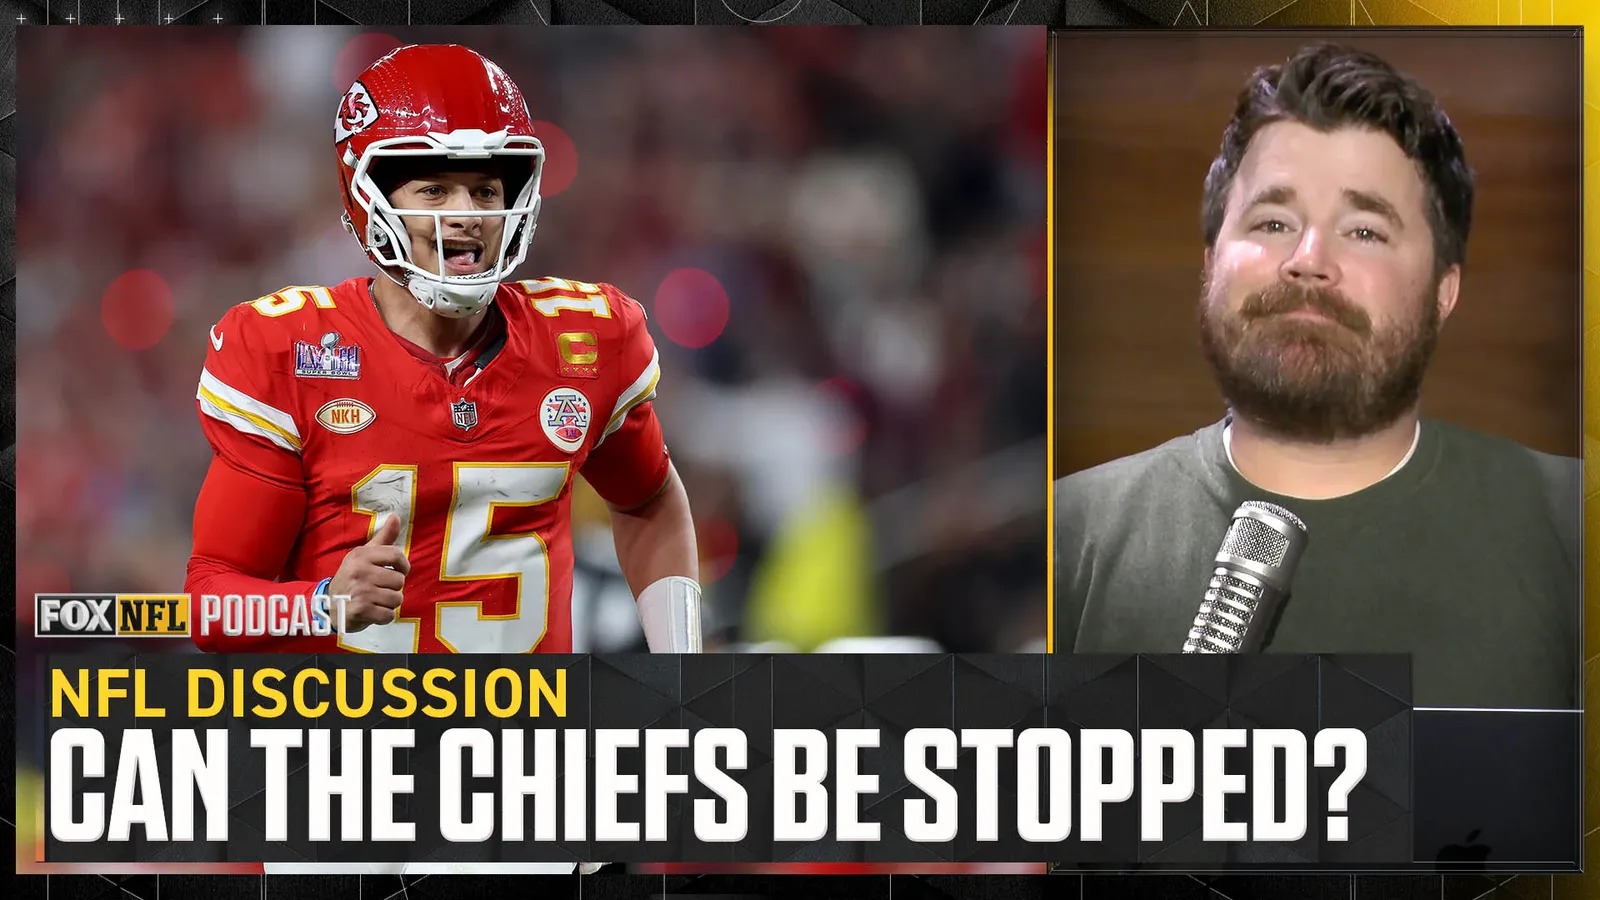 What can teams do to defeat Chiefs great Patrick Mahomes?